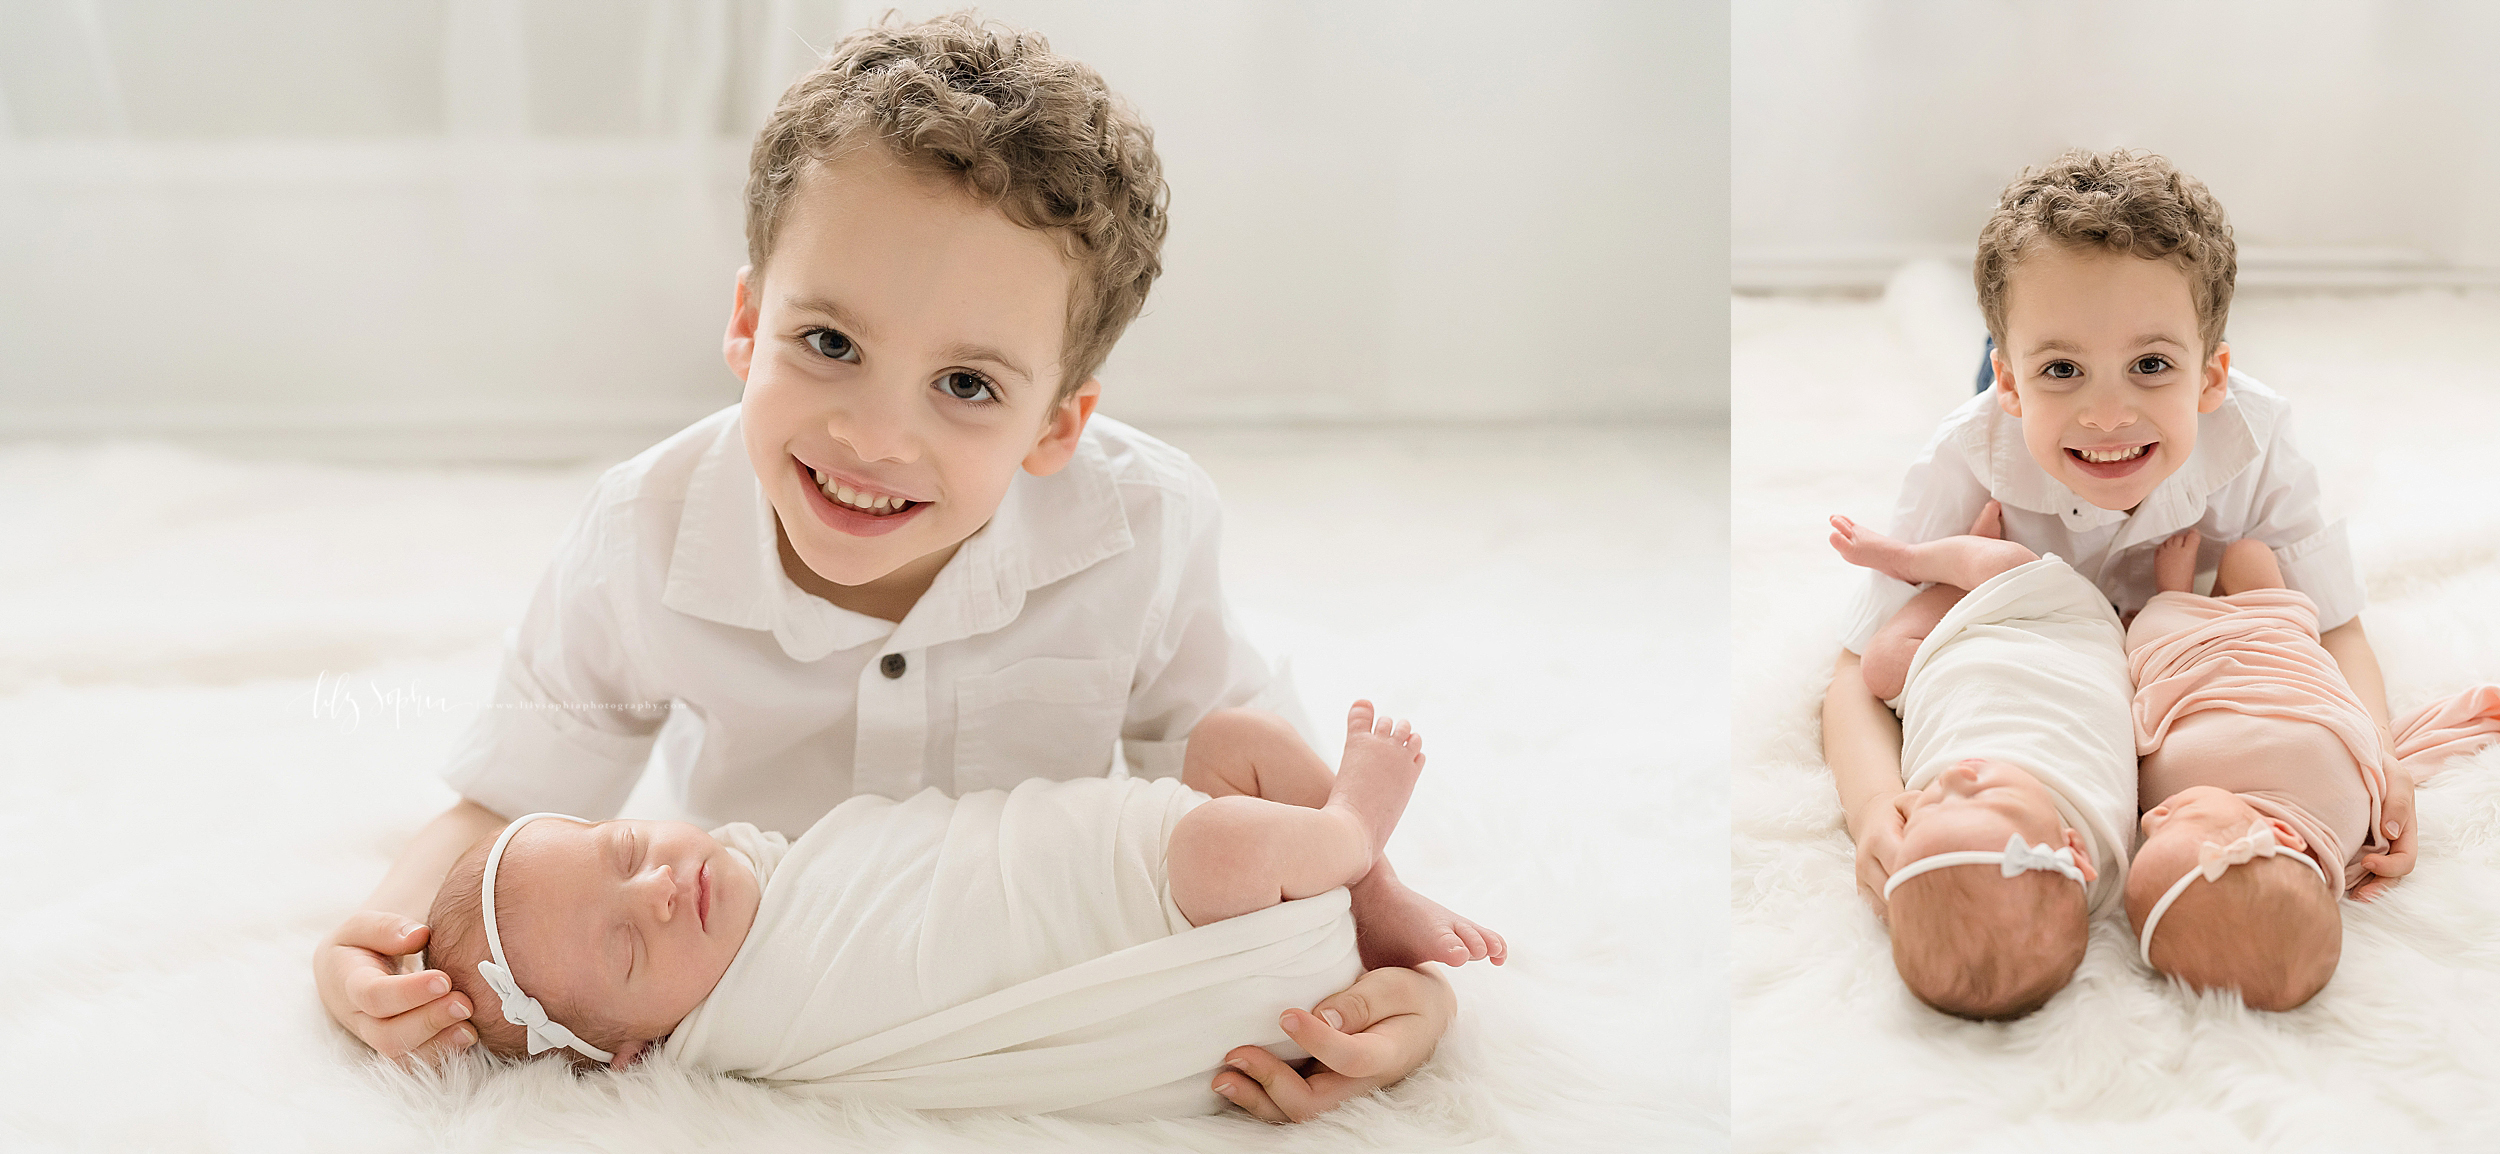 atlanta-decatur-candler-park-sandy-springs-buckhead-virginia-highlands-west-end-decatur-lily-sophia-photography-identical-twin-baby-newborn-girls-toddler-big-brother-family-photos_2054.jpg